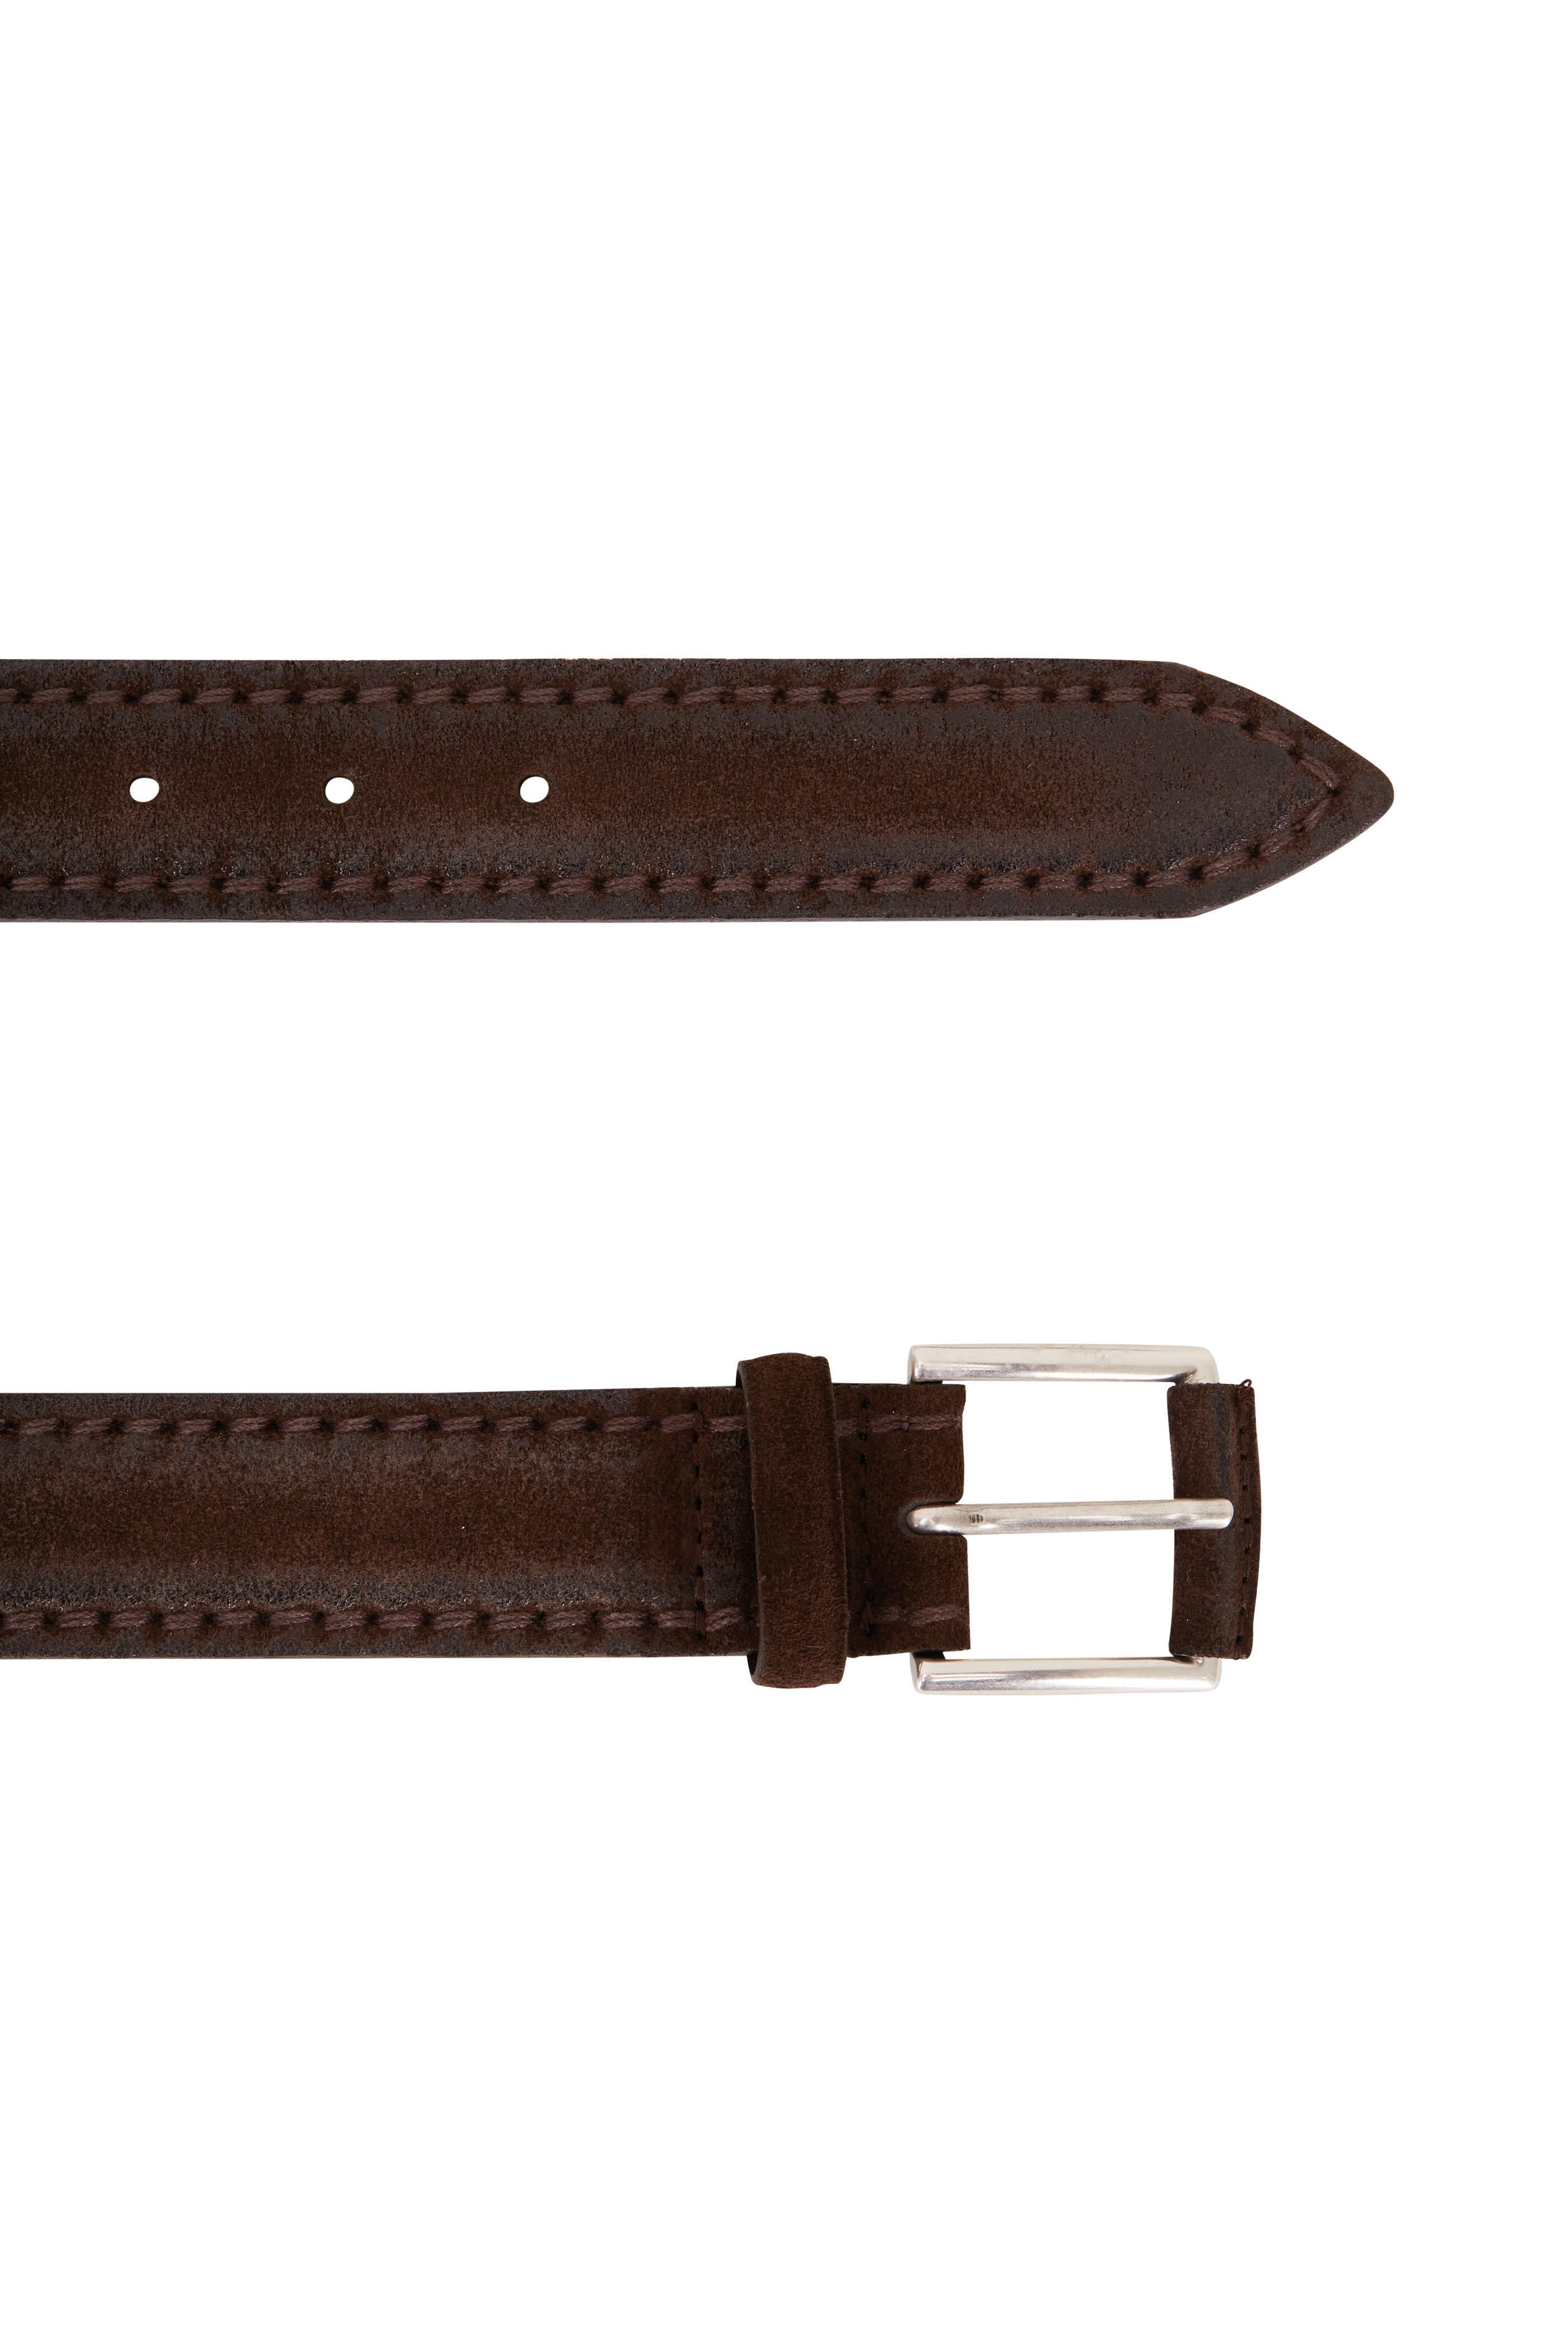 Orciani - Dark Brown Leather & Suede Belt | Mitchell Stores